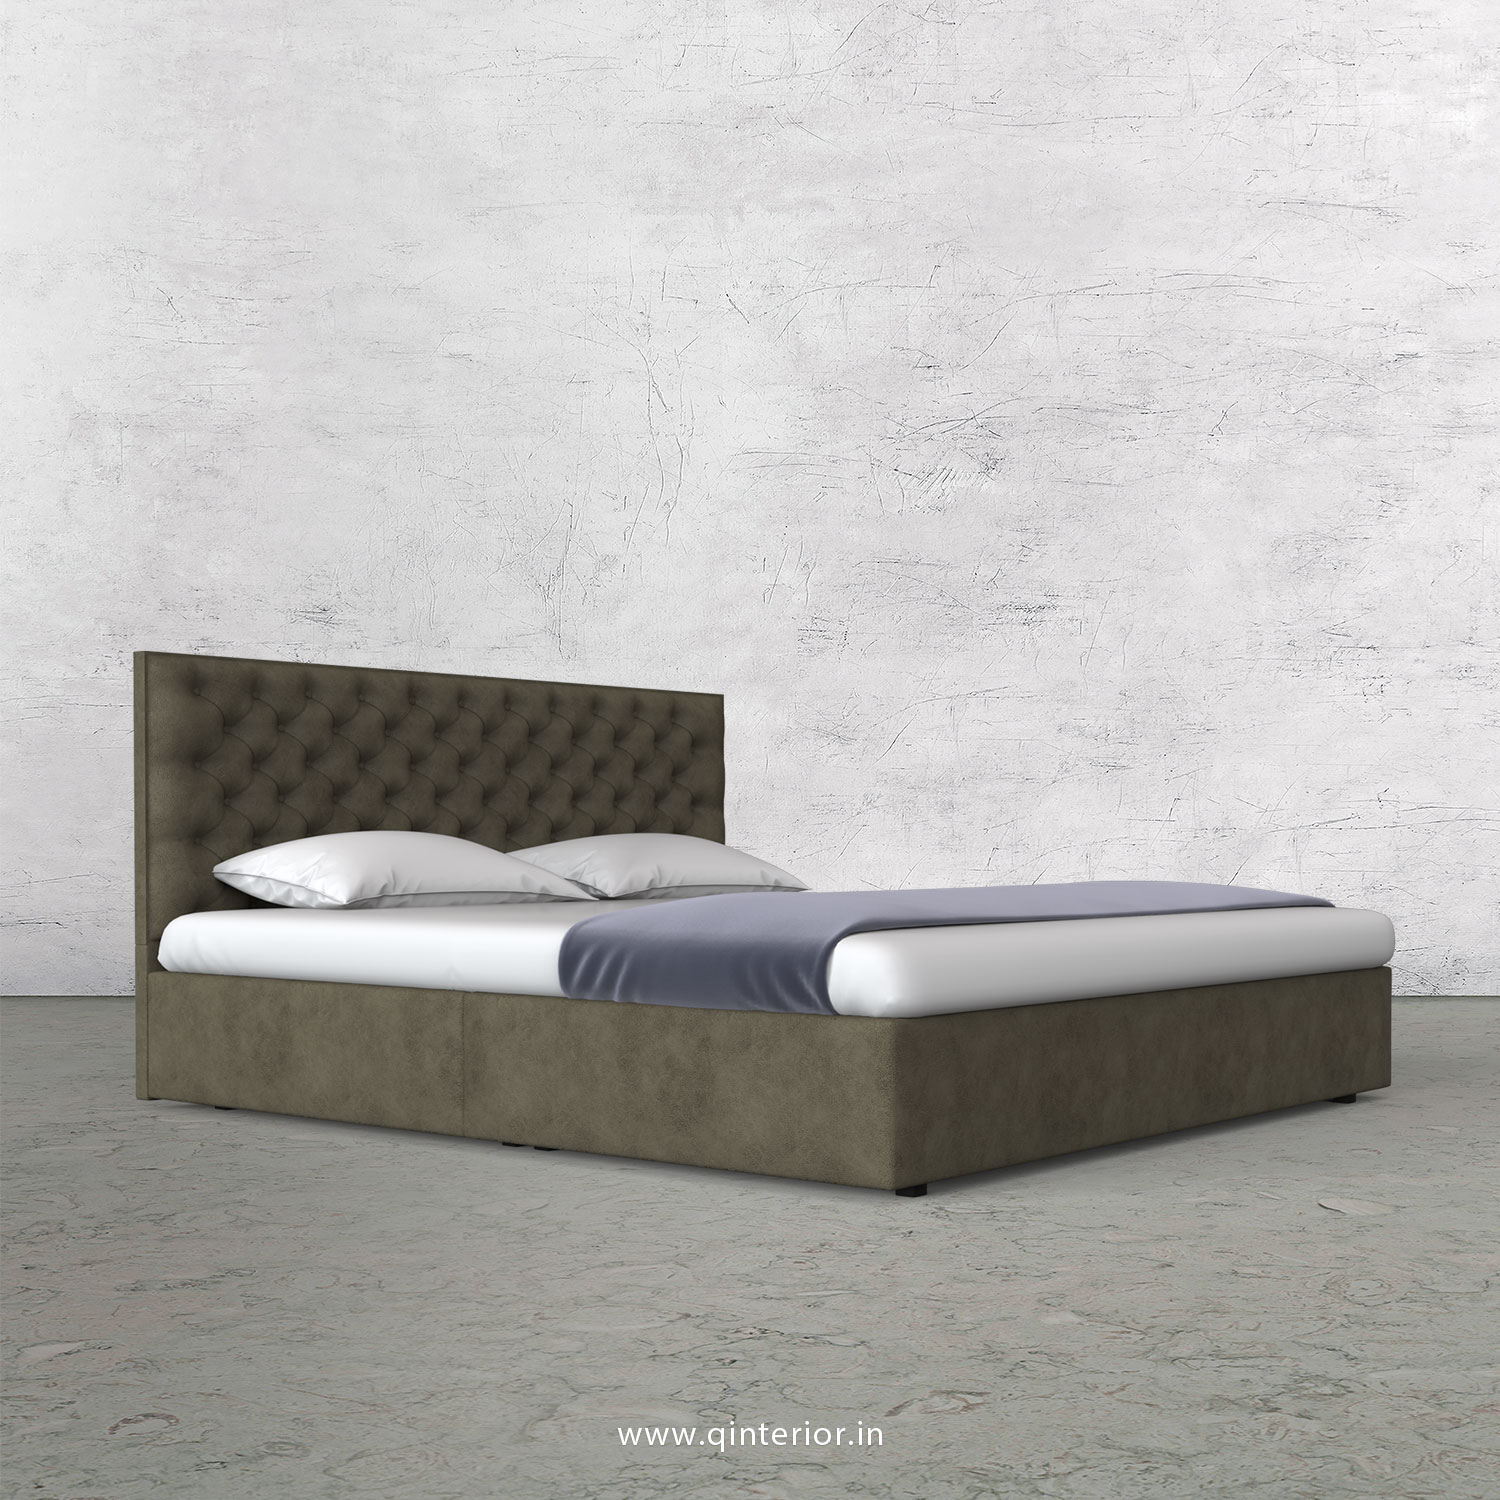 Orion King Size Bed in Fab Leather Fabric - KBD009 FL03